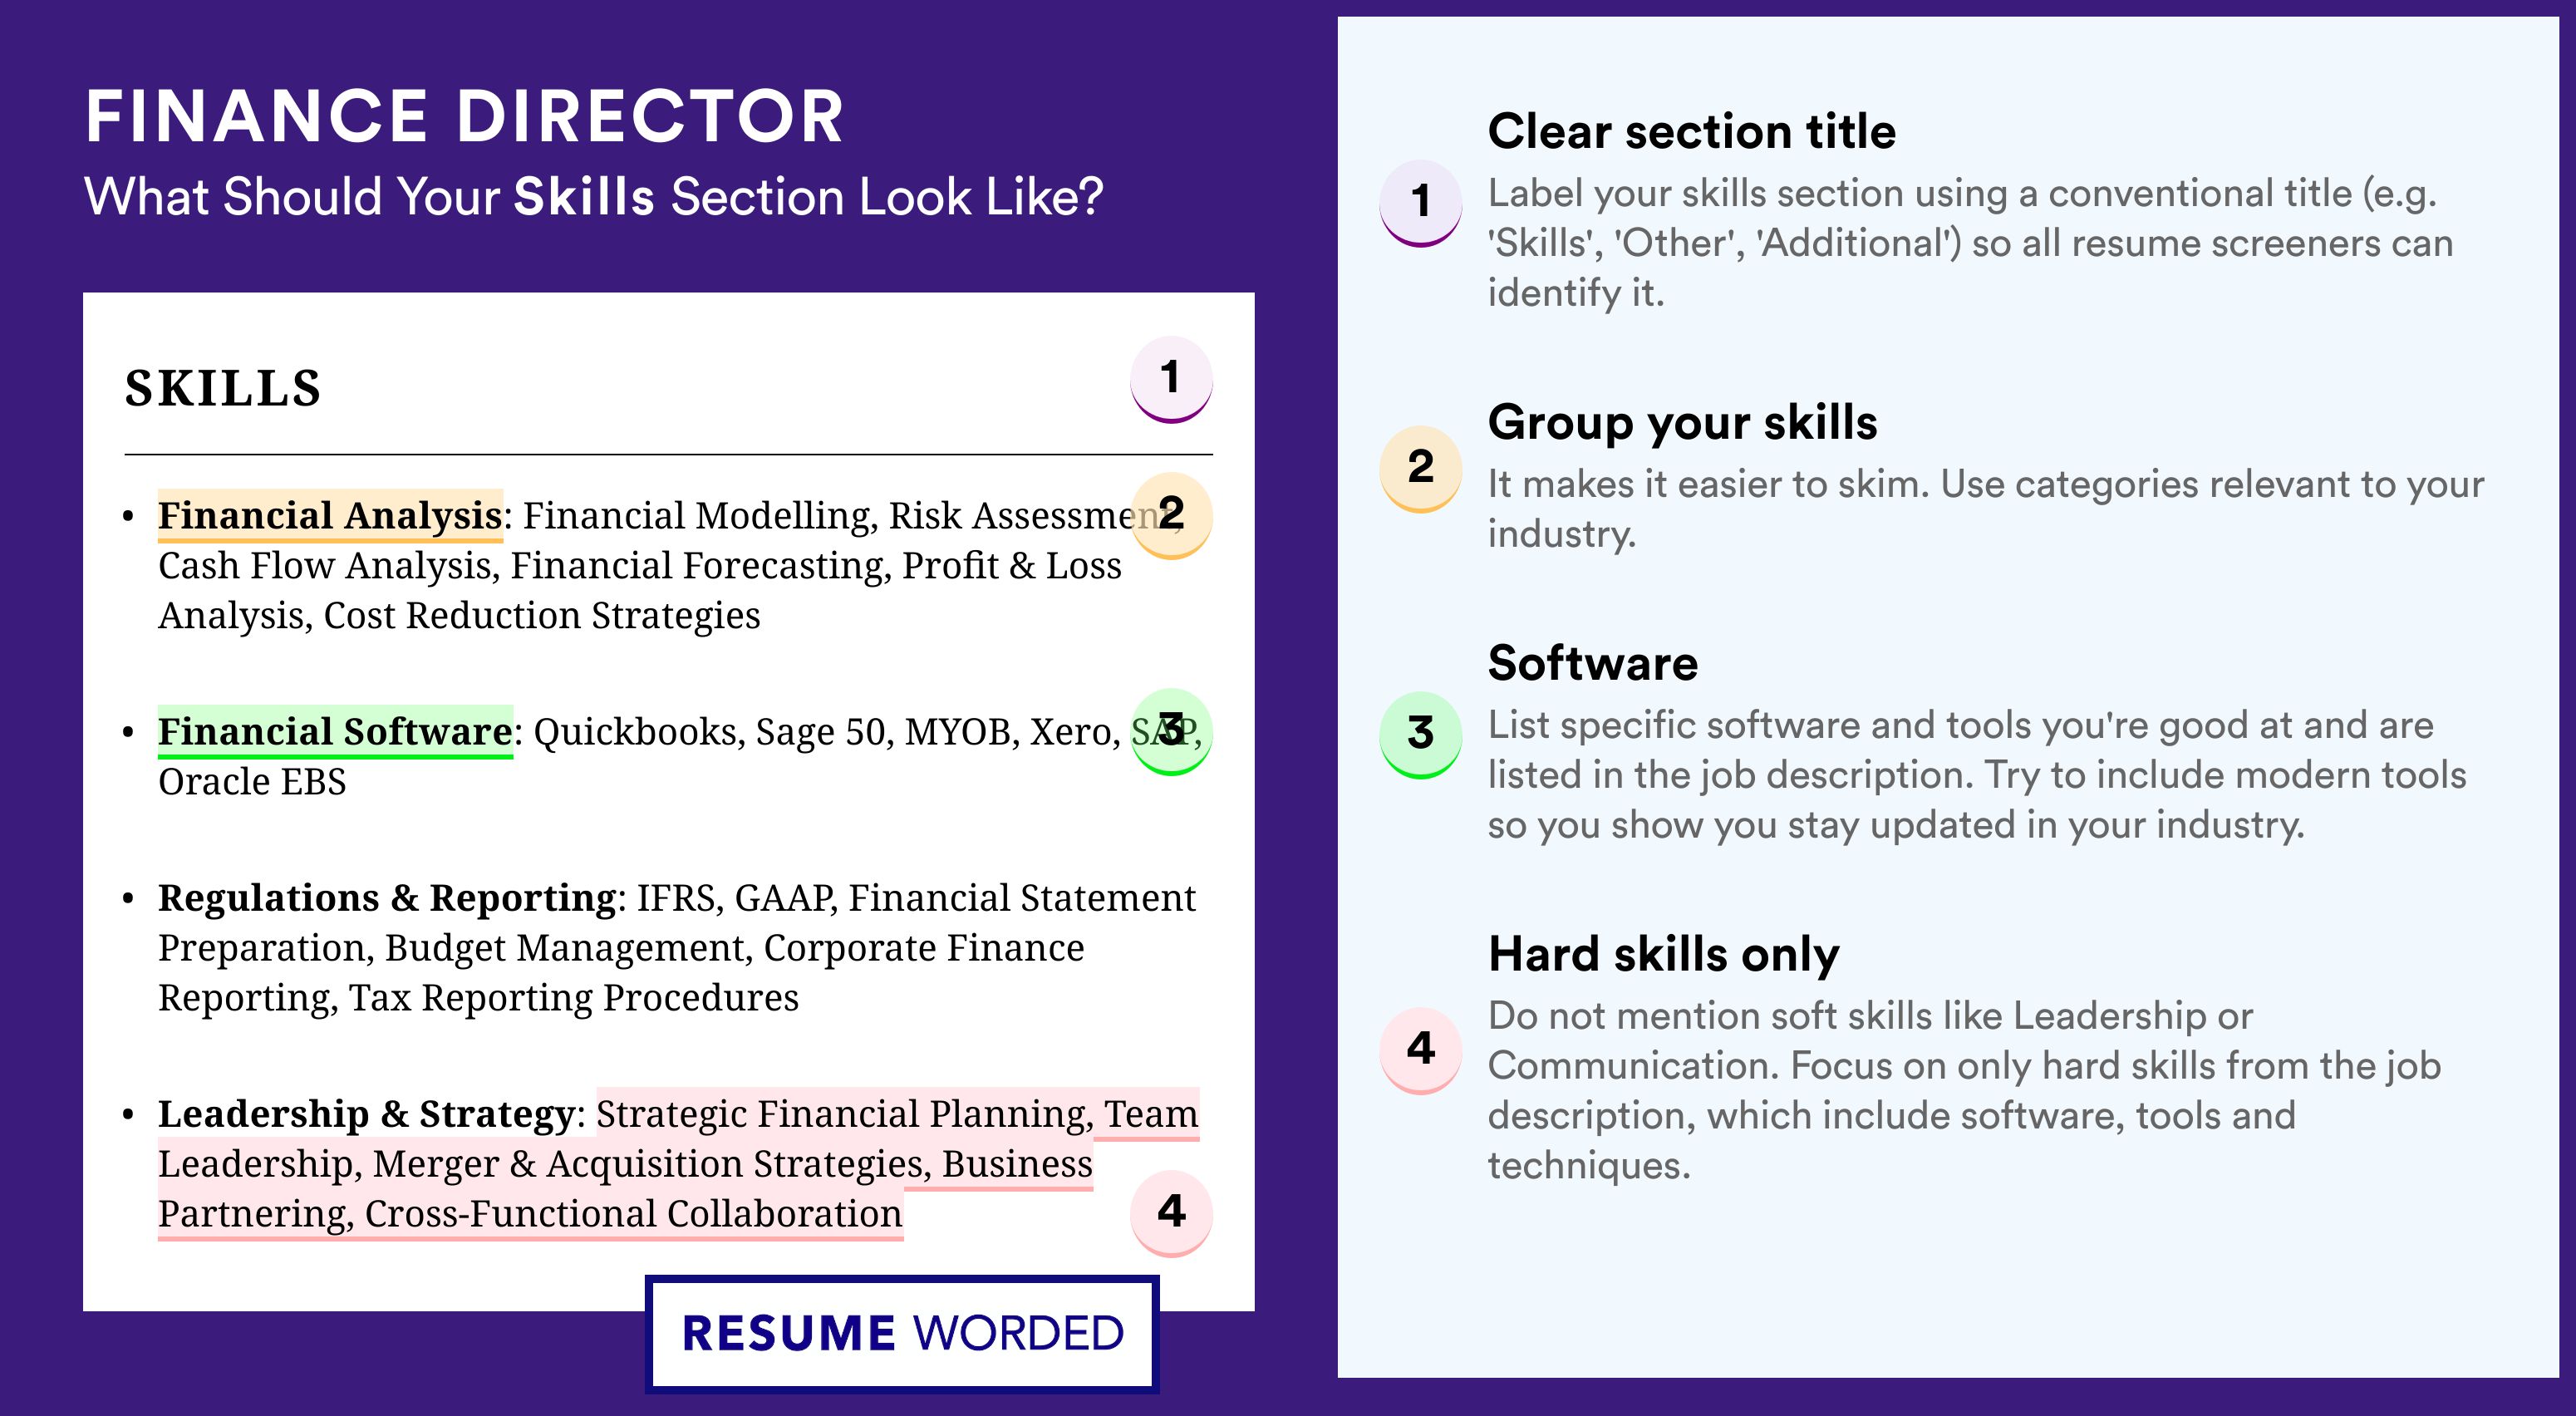 How To Write Your Skills Section - Finance Director Roles